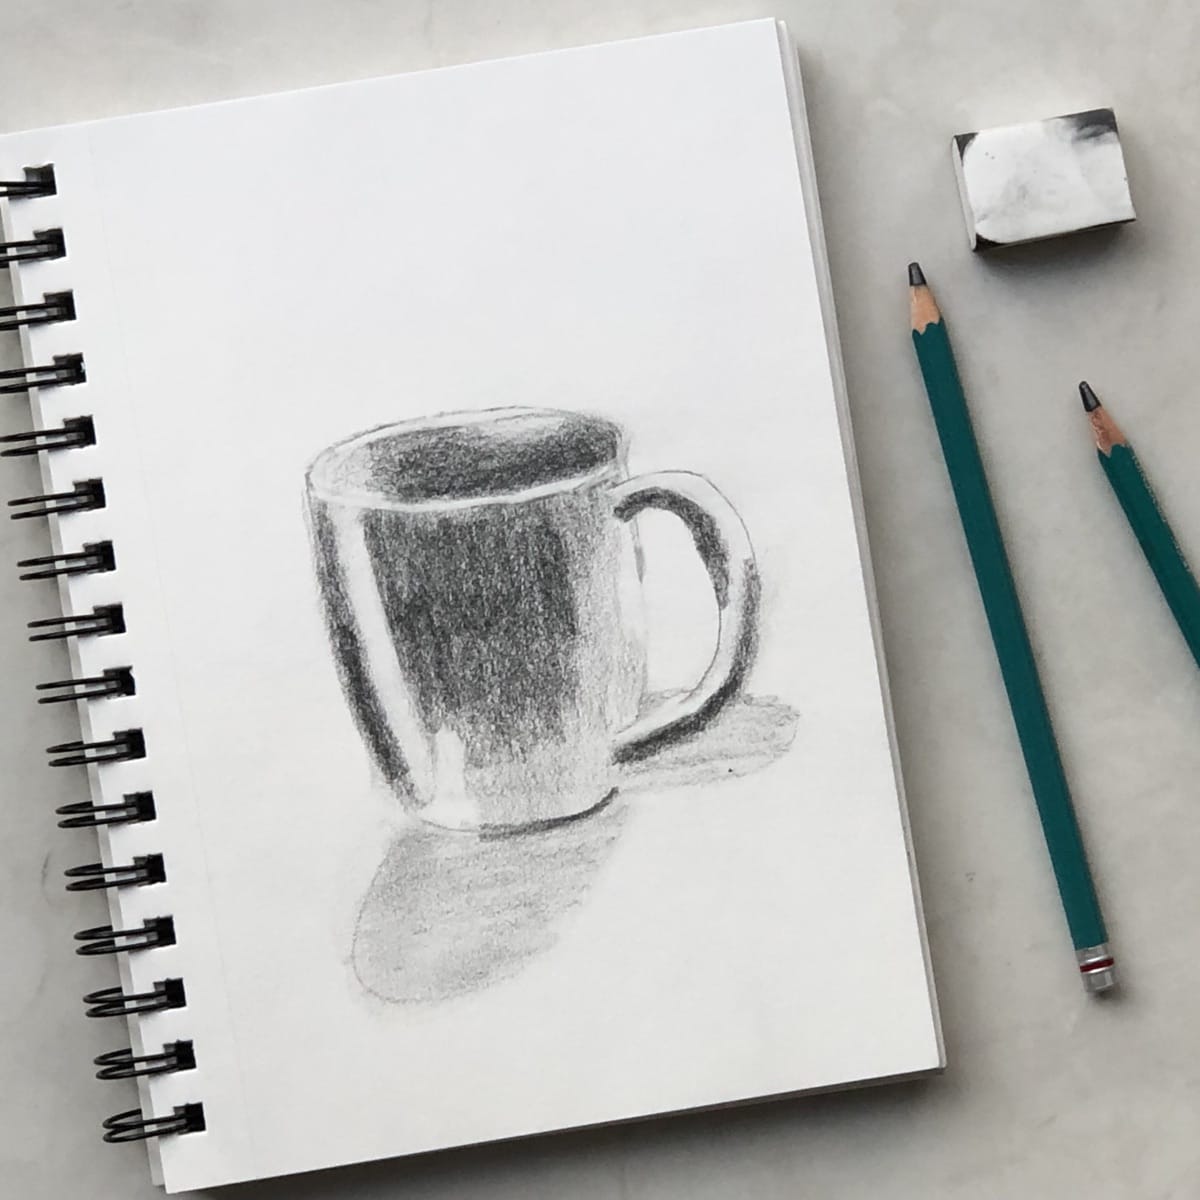 Learn How to Draw a Cup with Saucer Everyday Objects Step by Step   Drawing Tutorials